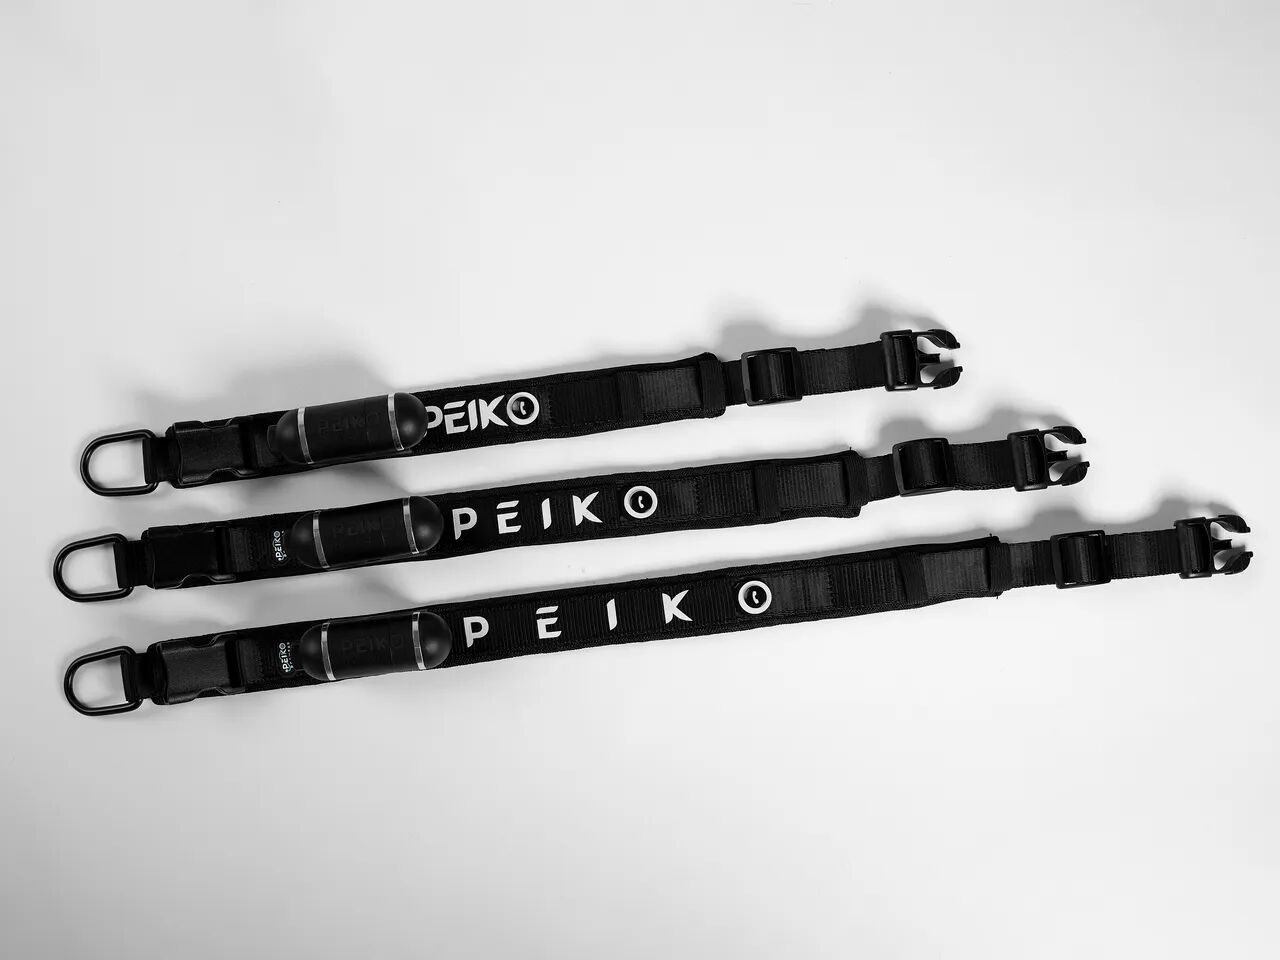 PEIKO® Quickleash™ Dogcollar With Built-in Retractable Dog Leash